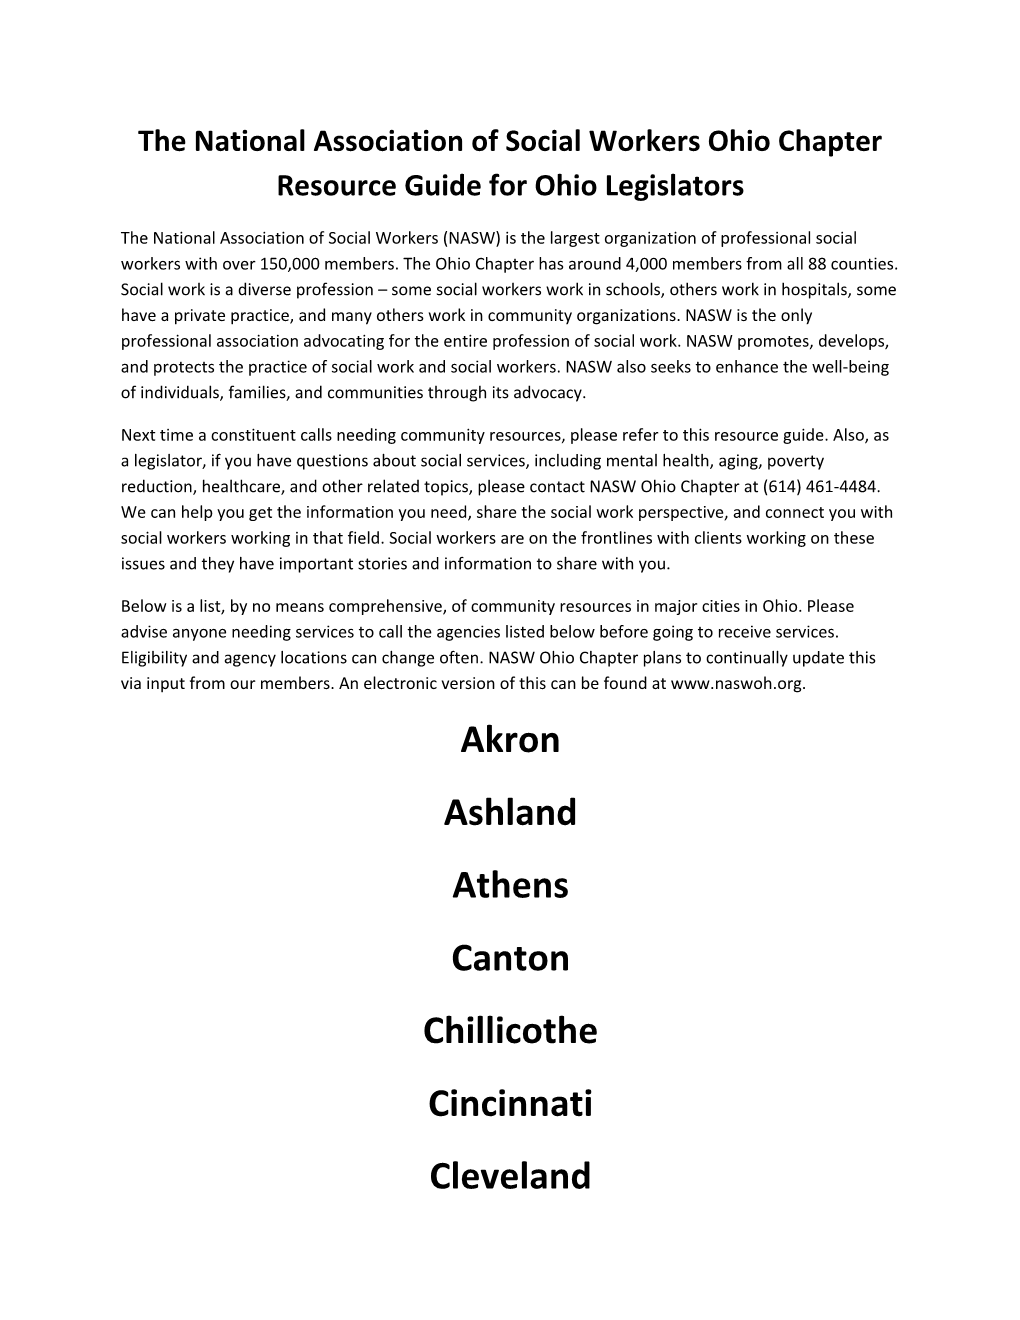 The National Association of Social Workers Ohio Chapter Resource Guide for Ohio Legislators